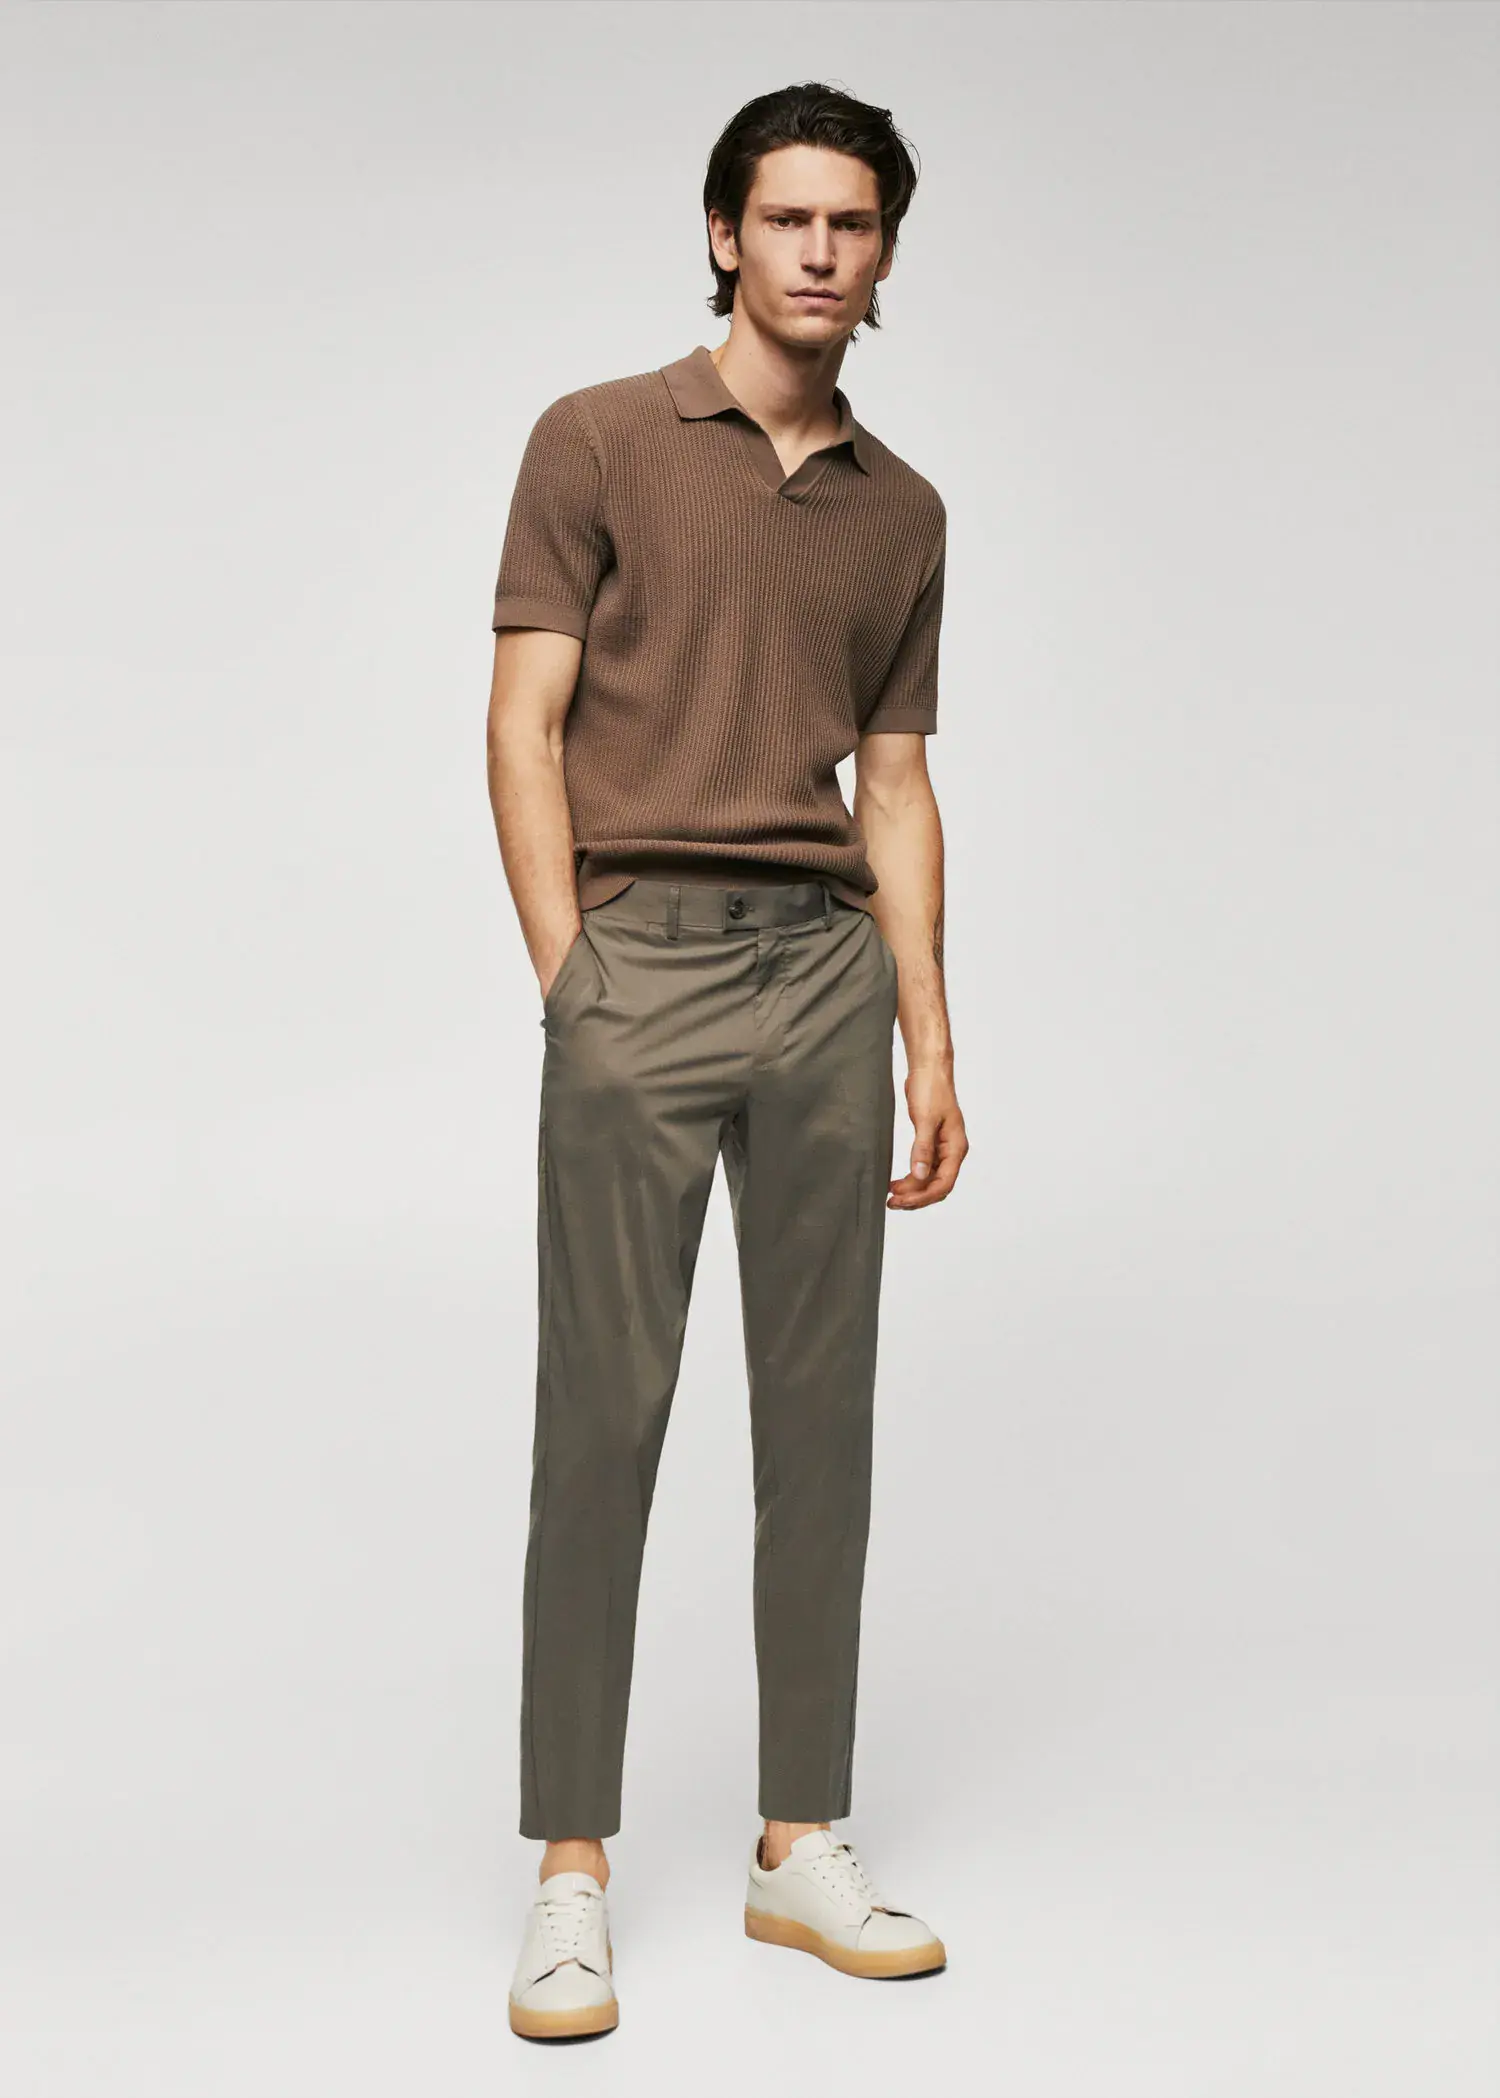 Mango Lightweight cotton pants. a man in a brown polo shirt and brown pants. 